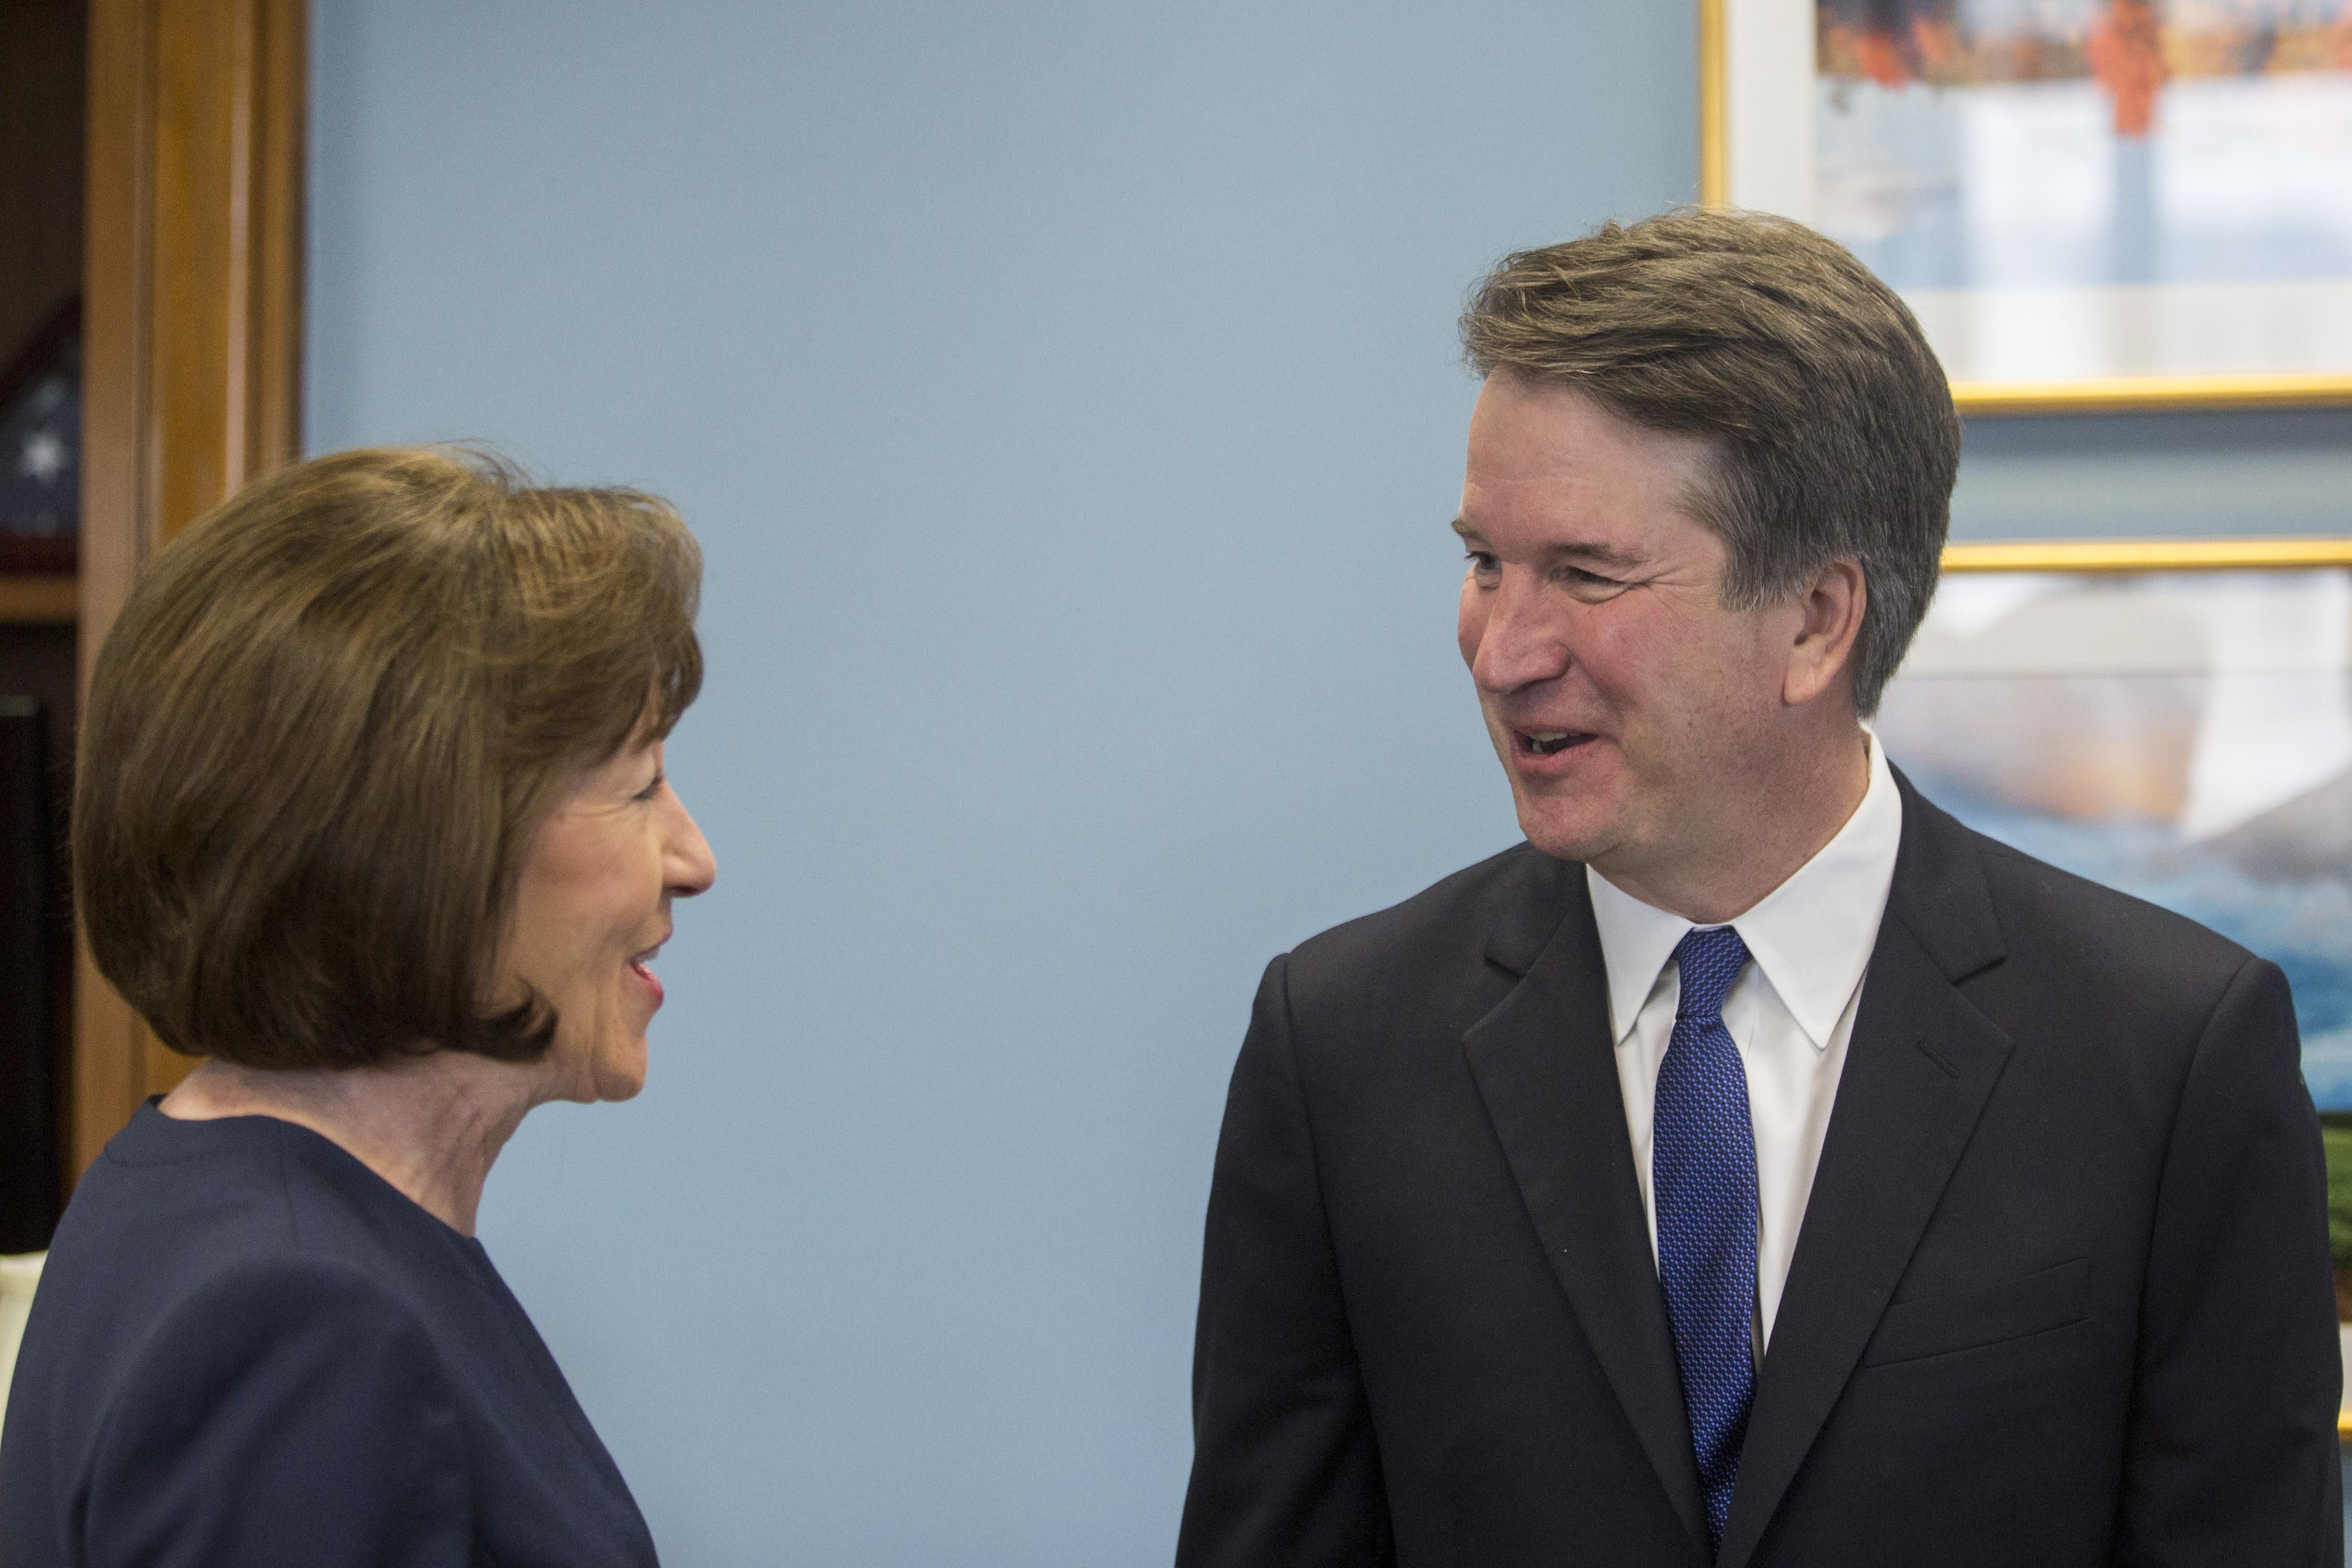 Sen. Susan Collins meets with Supreme Court nominee Brett Kavanaugh on Tuesday.